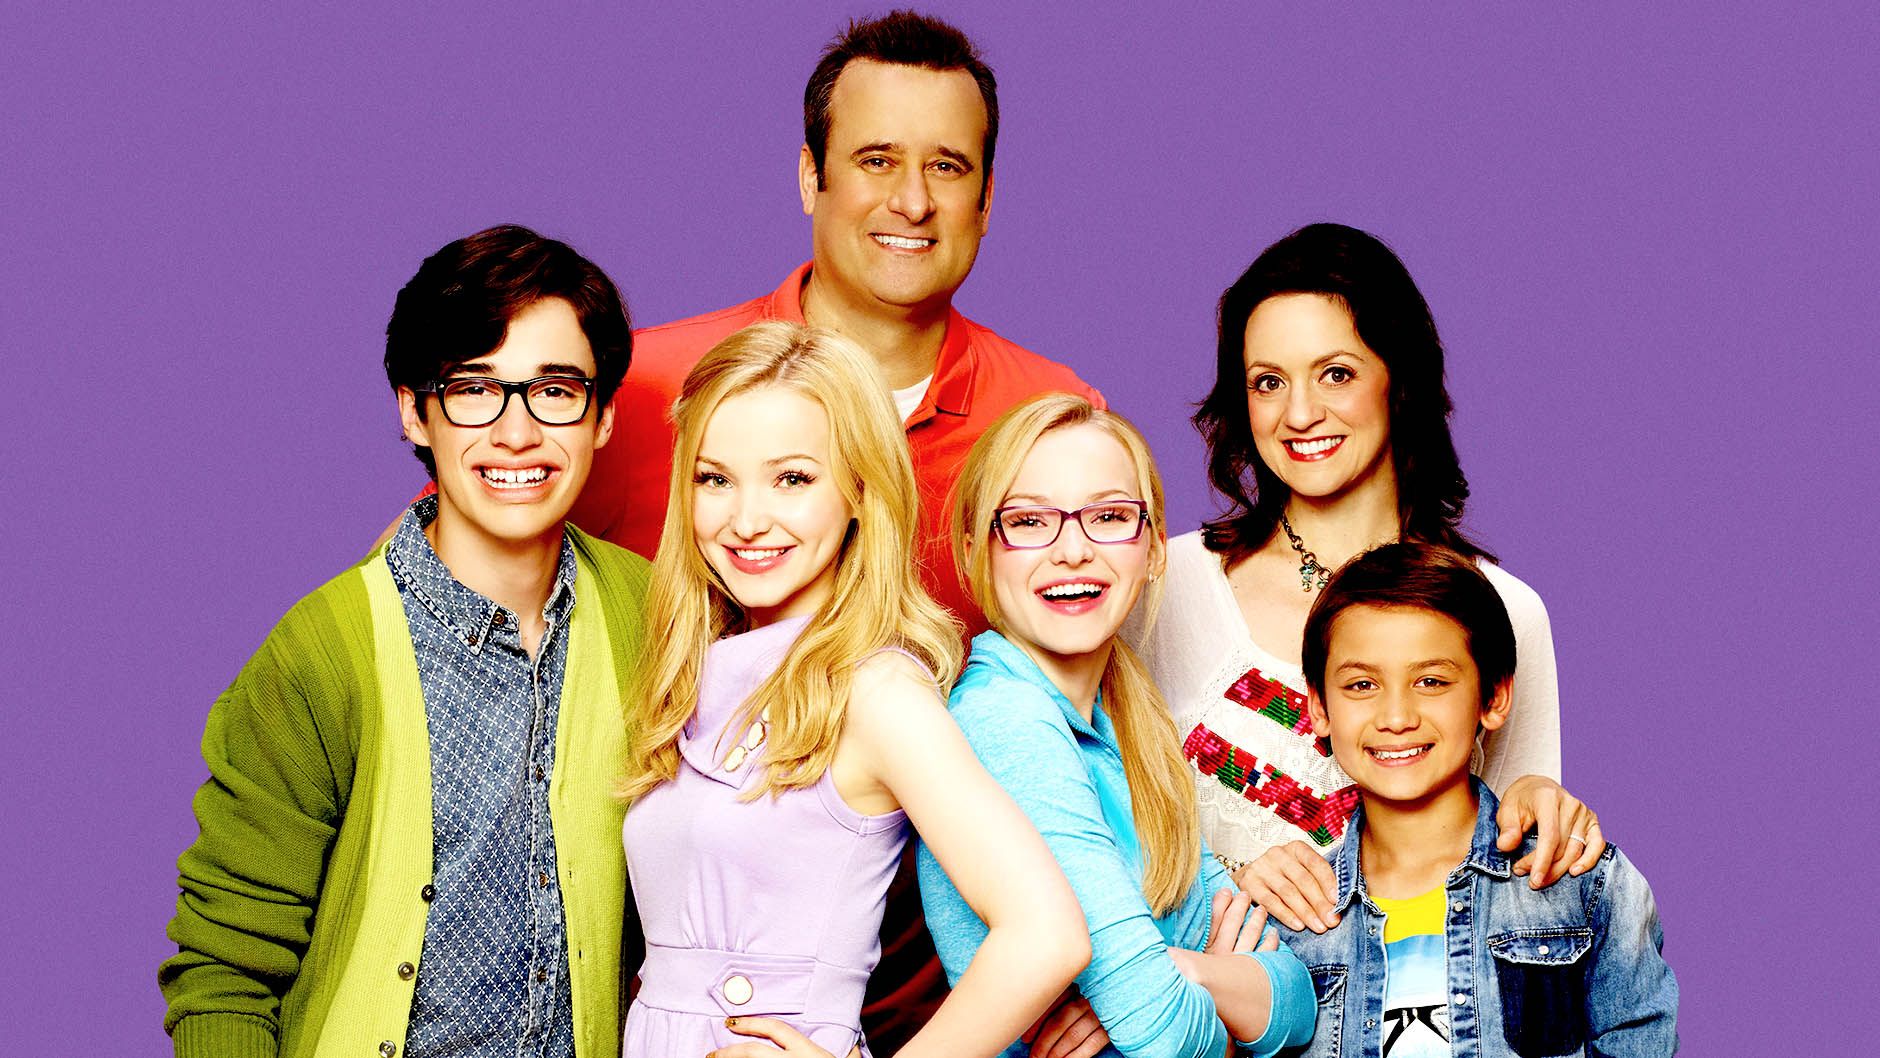 liv and maddie cast